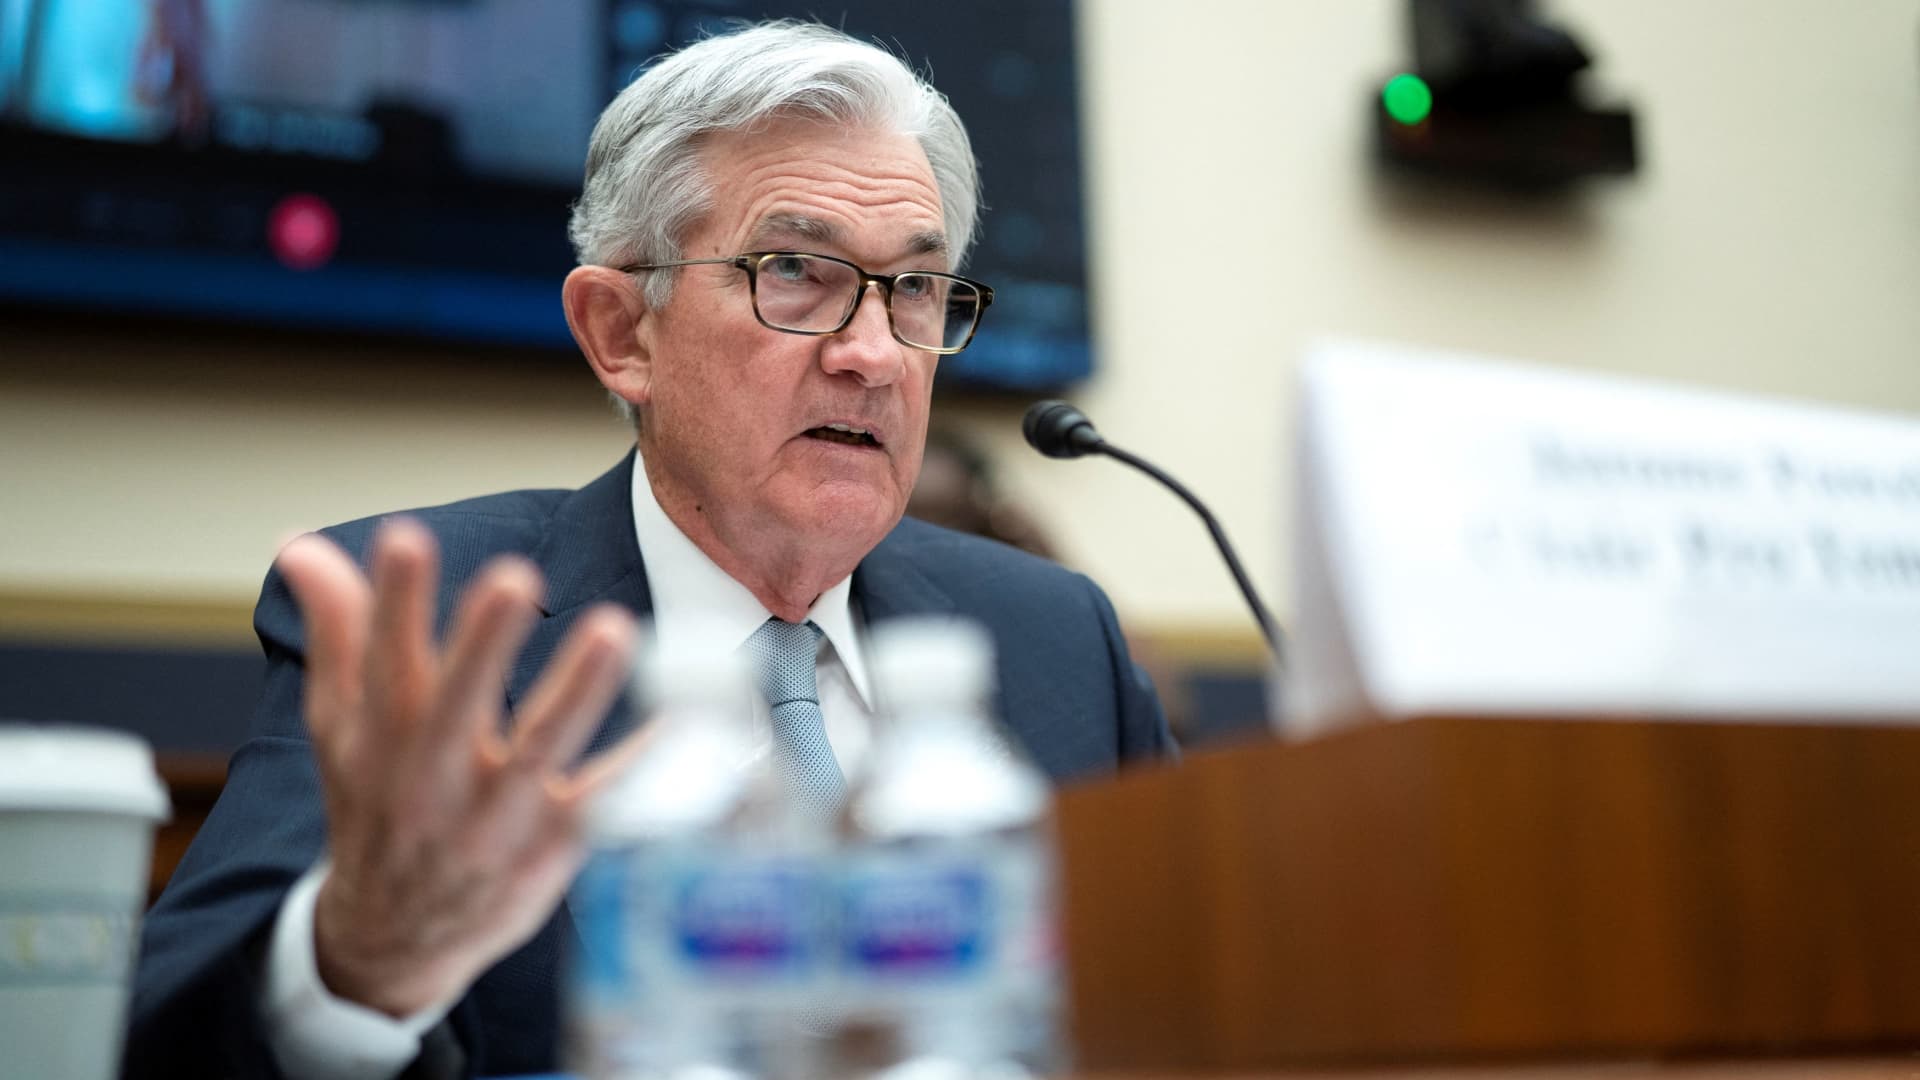 Federal Reserve chief Jerome Powell testifies before a U.S. House Financial Services Committee hearing on Capitol Hill in Washington, U.S., March 2, 2022.